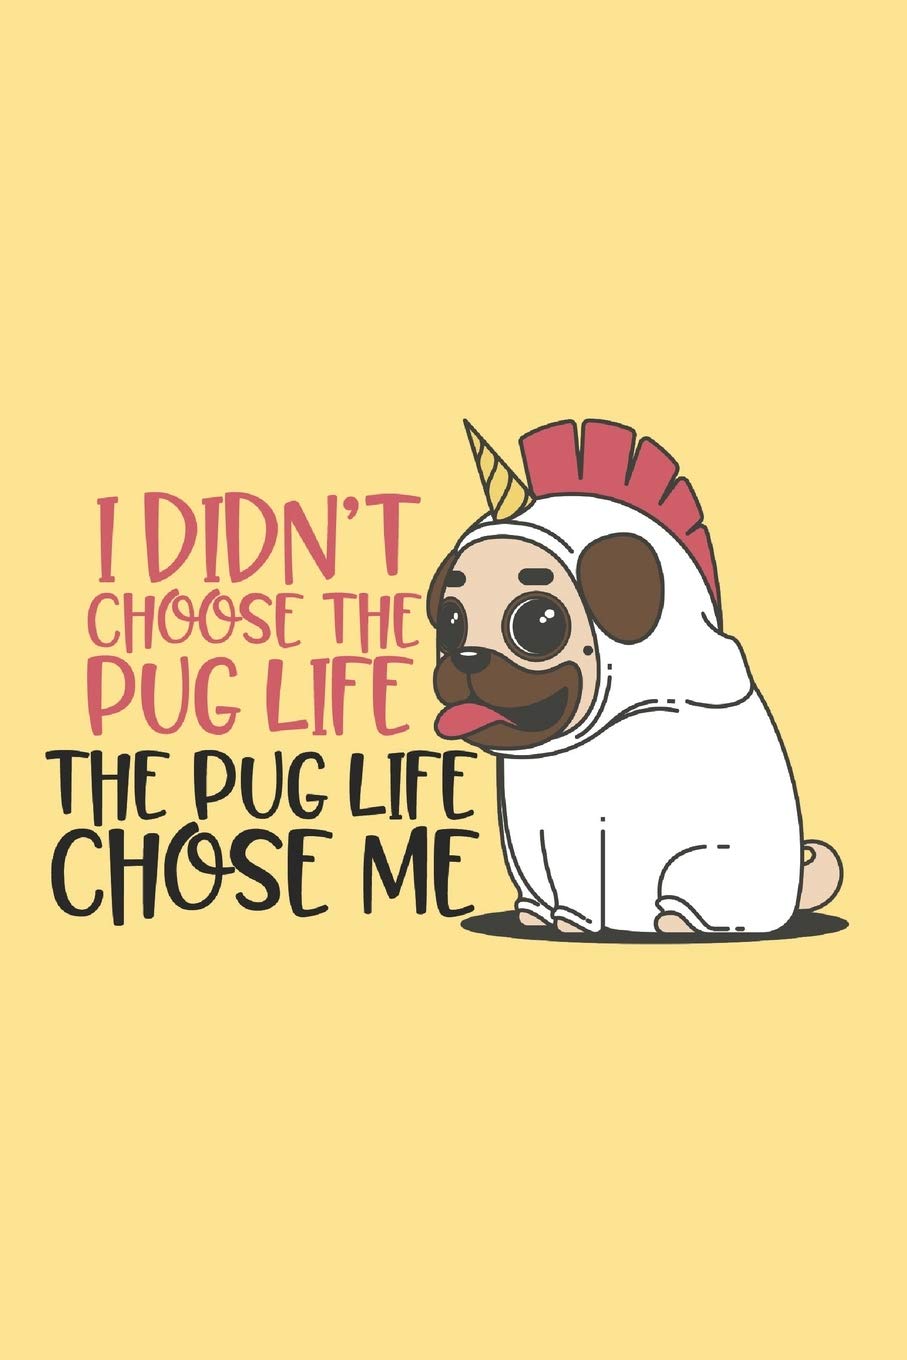 I Didn't Choose the Pug Life. The Pug Life Chose Me: Pug Gift for Women Notebook Featuring a Funny Pug Dressed in a Unicorn Costume on a Yellow Background: Lemon